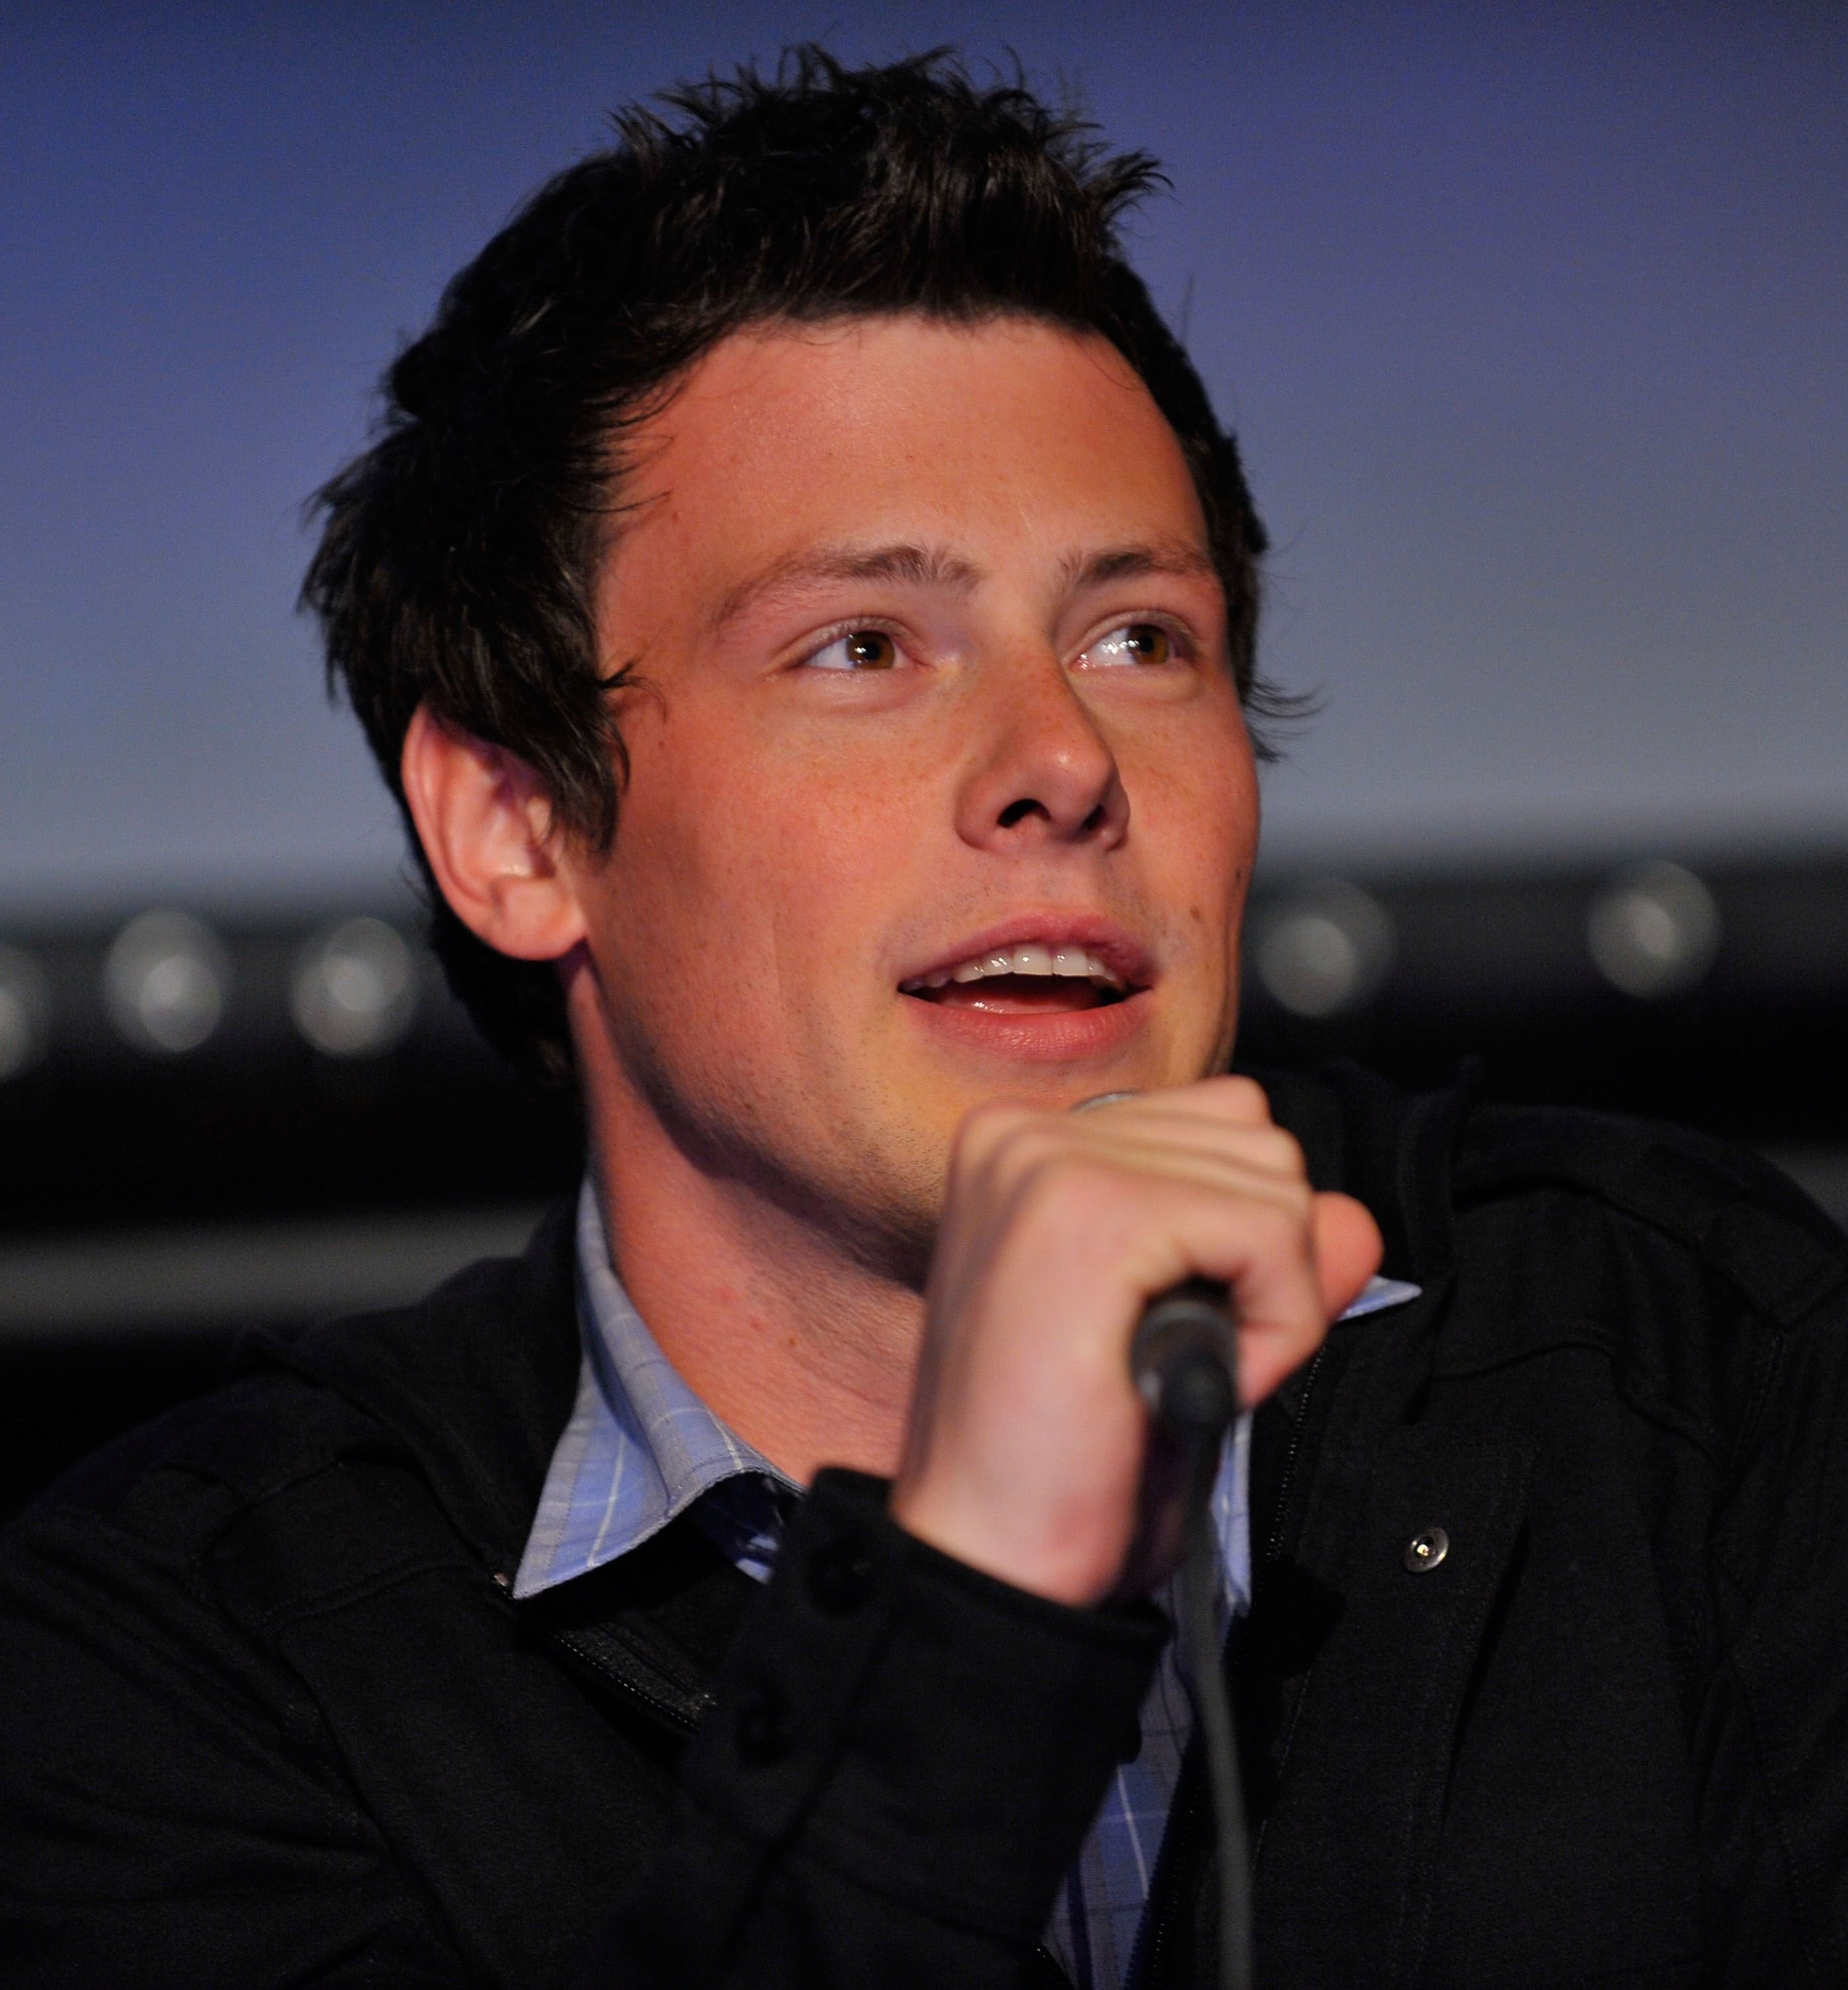 Cory Monteith at a Q&A session at the GLEE premiere event in 2009 in Santa Monica | Source: Getty Images